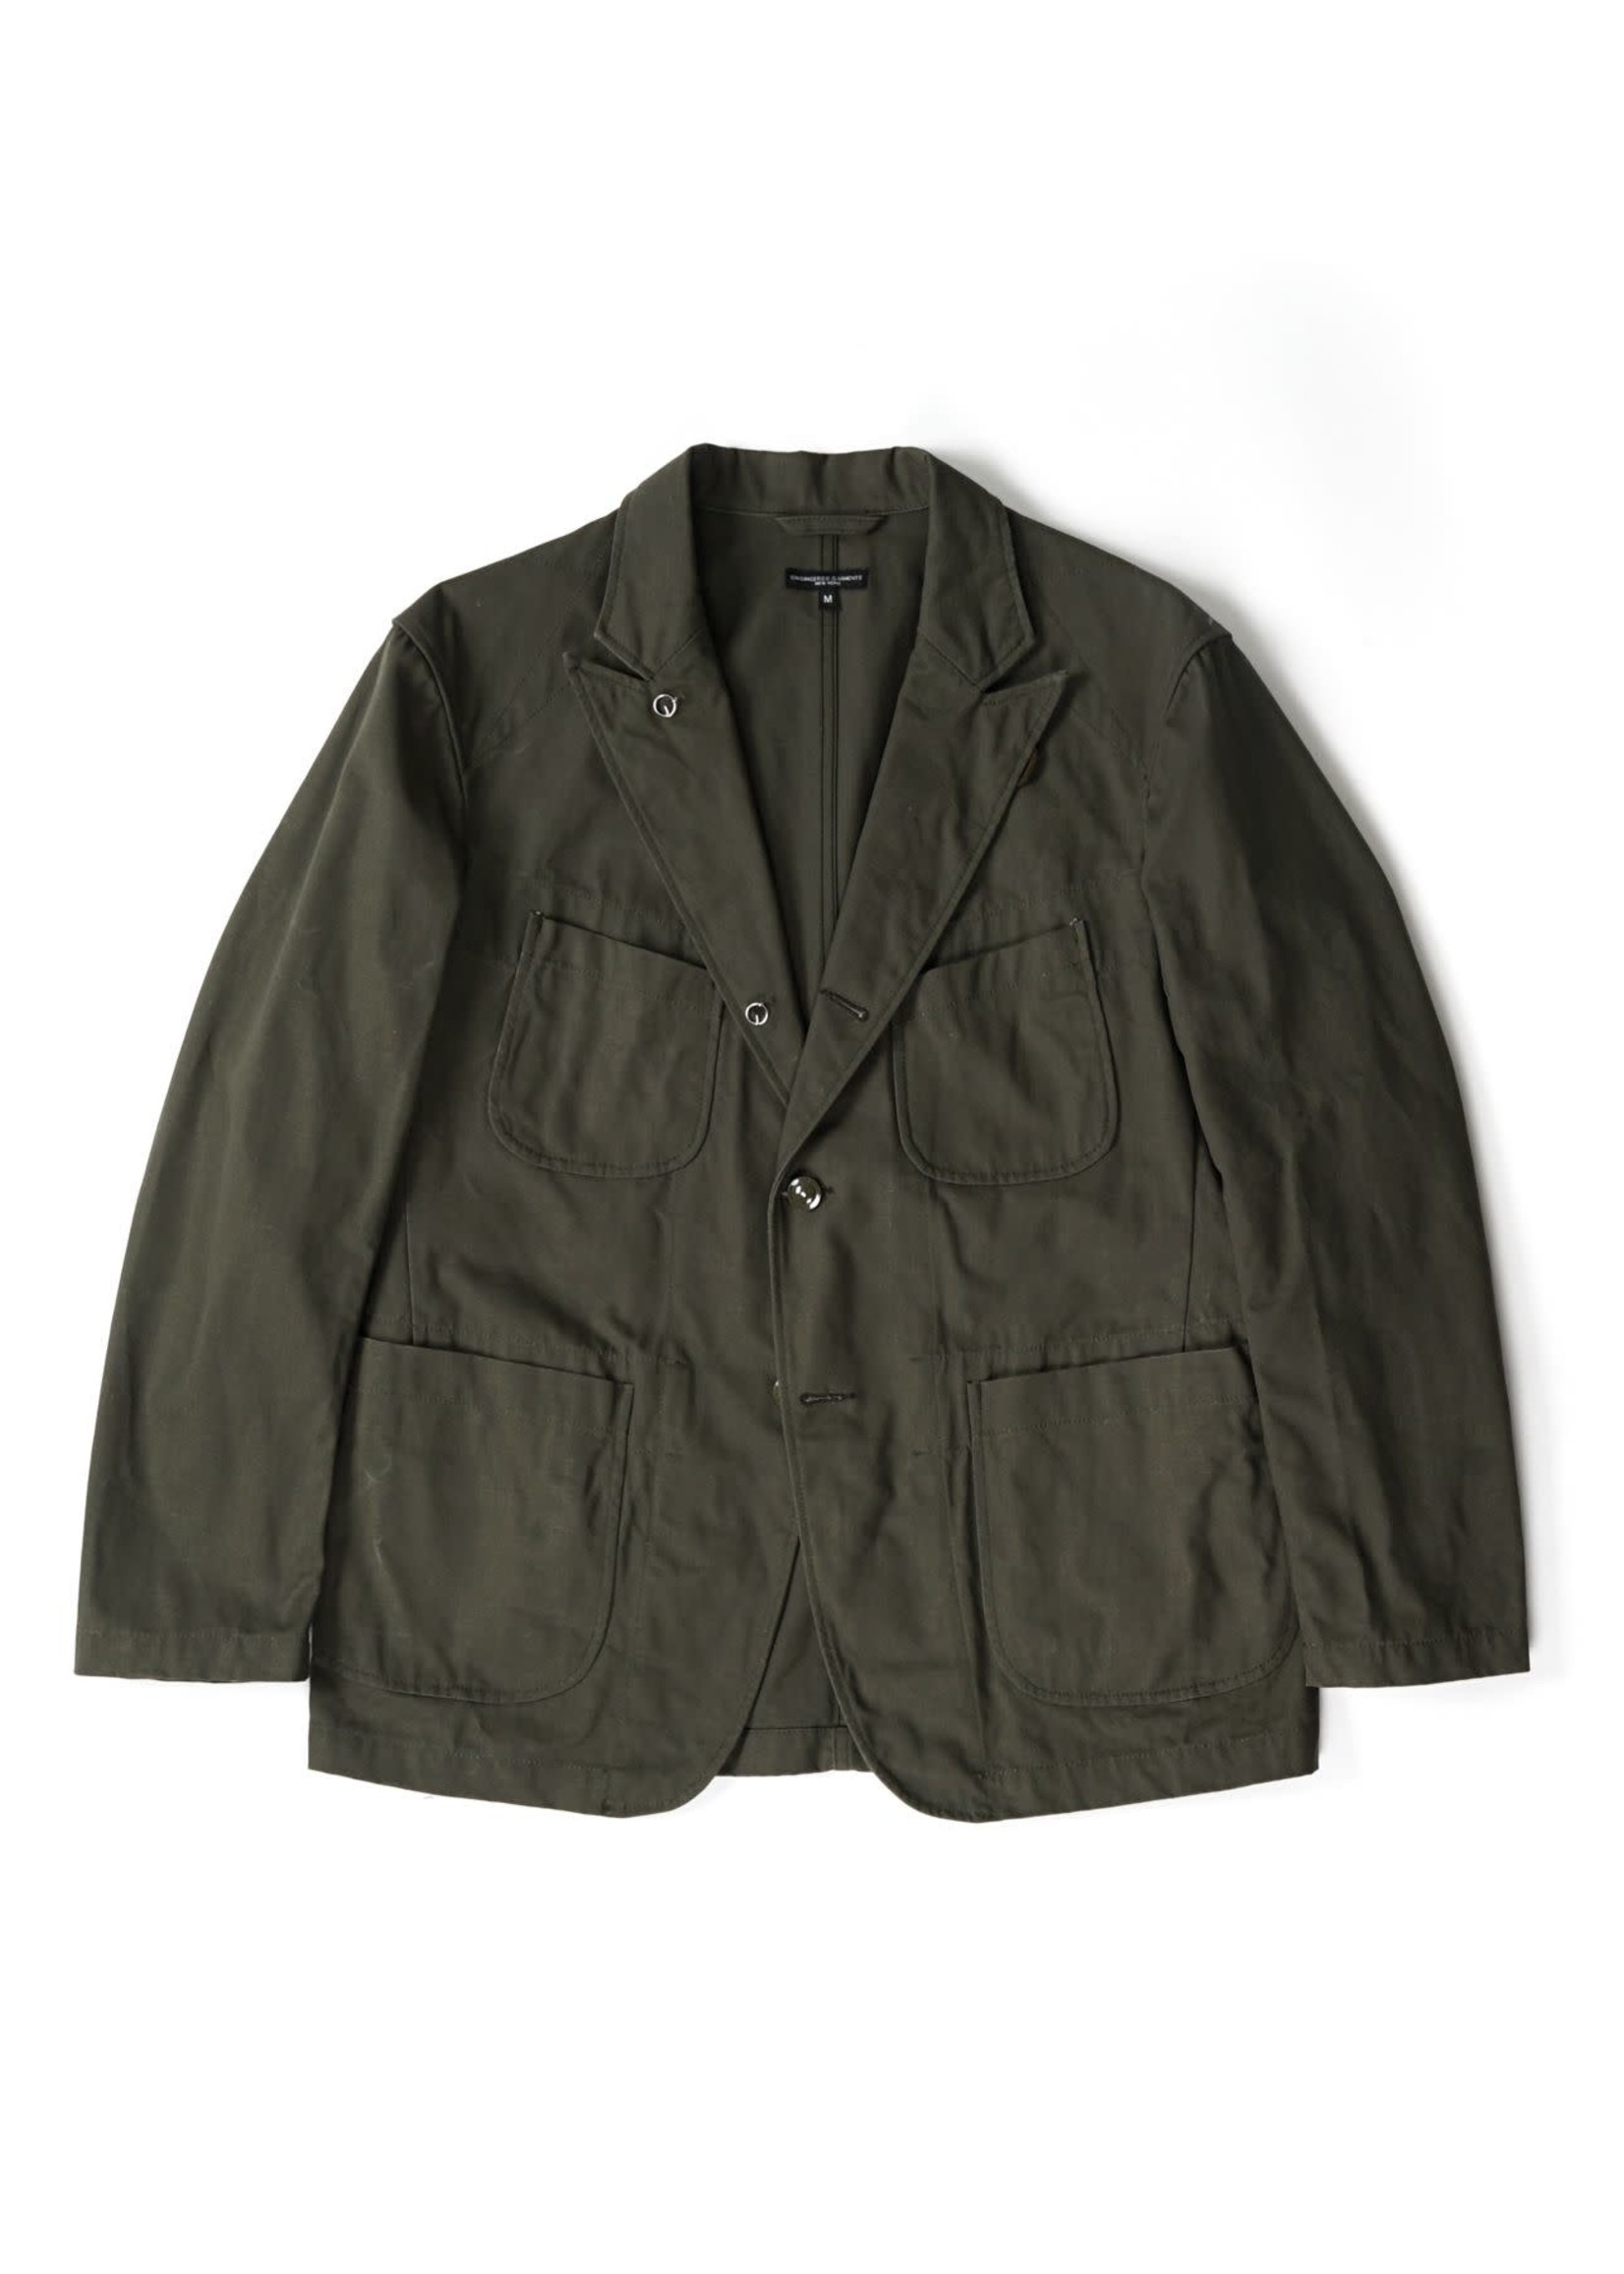 EG Bedford Jacket Olive Heavy Weight Cotton Ripstop (21F1D005